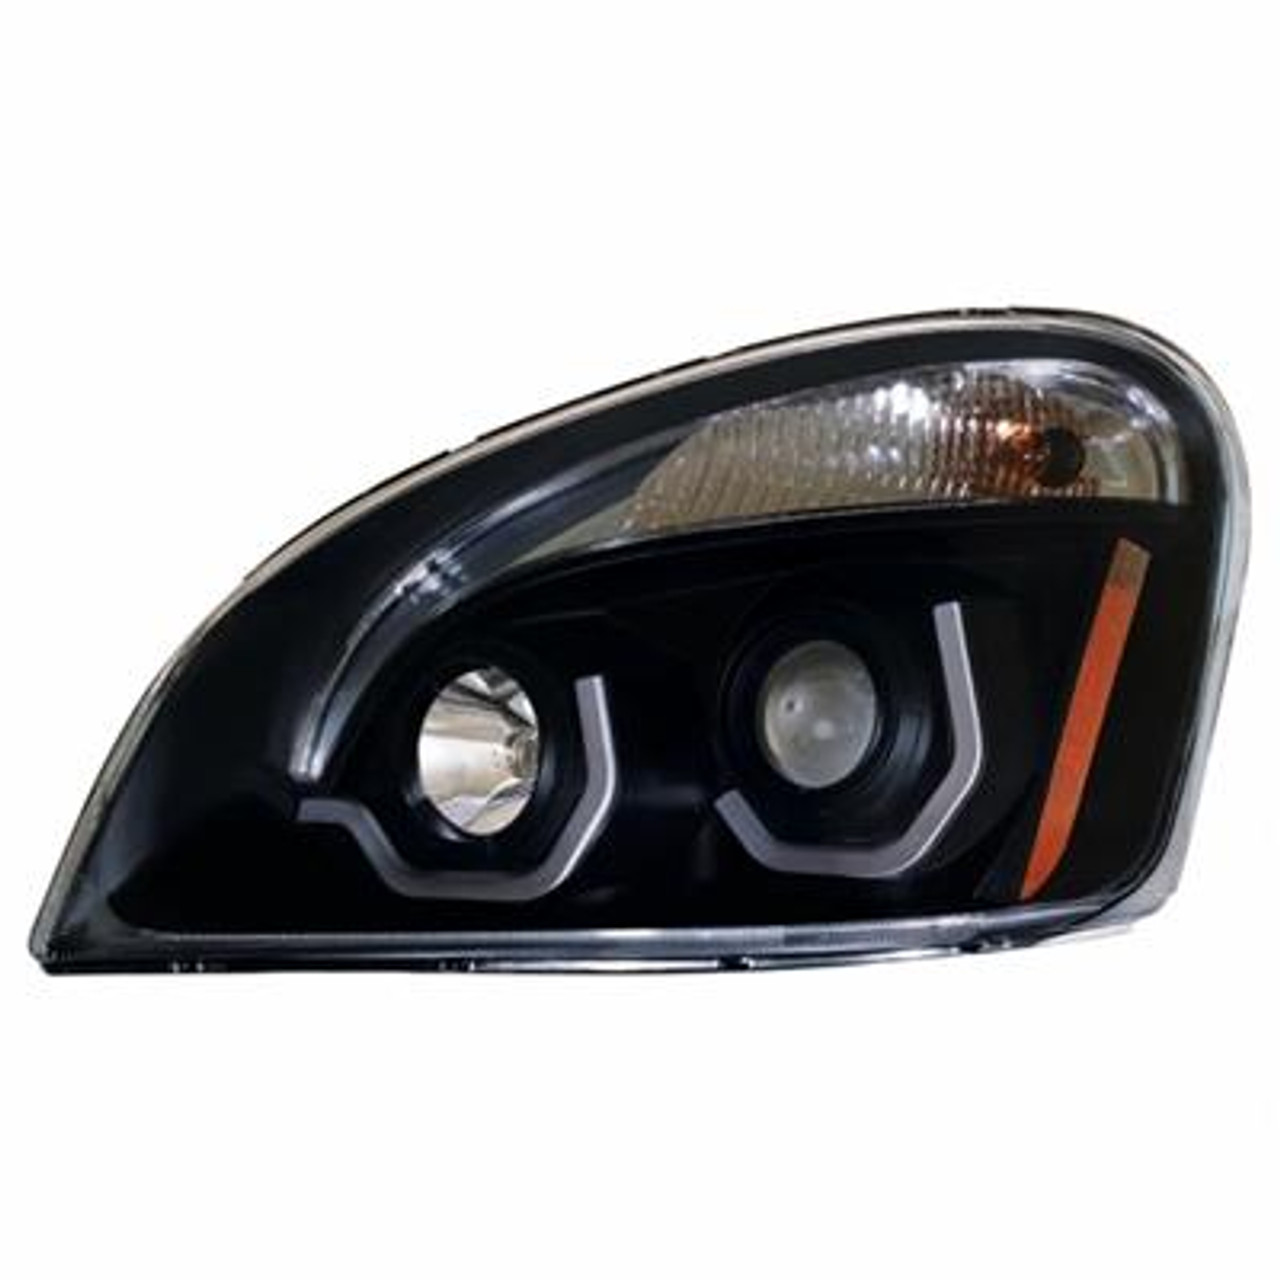 Blackout Projection Headlight W/Dual Function Amber LED Position Lights For 2008-17 FL Cascadia - Driver